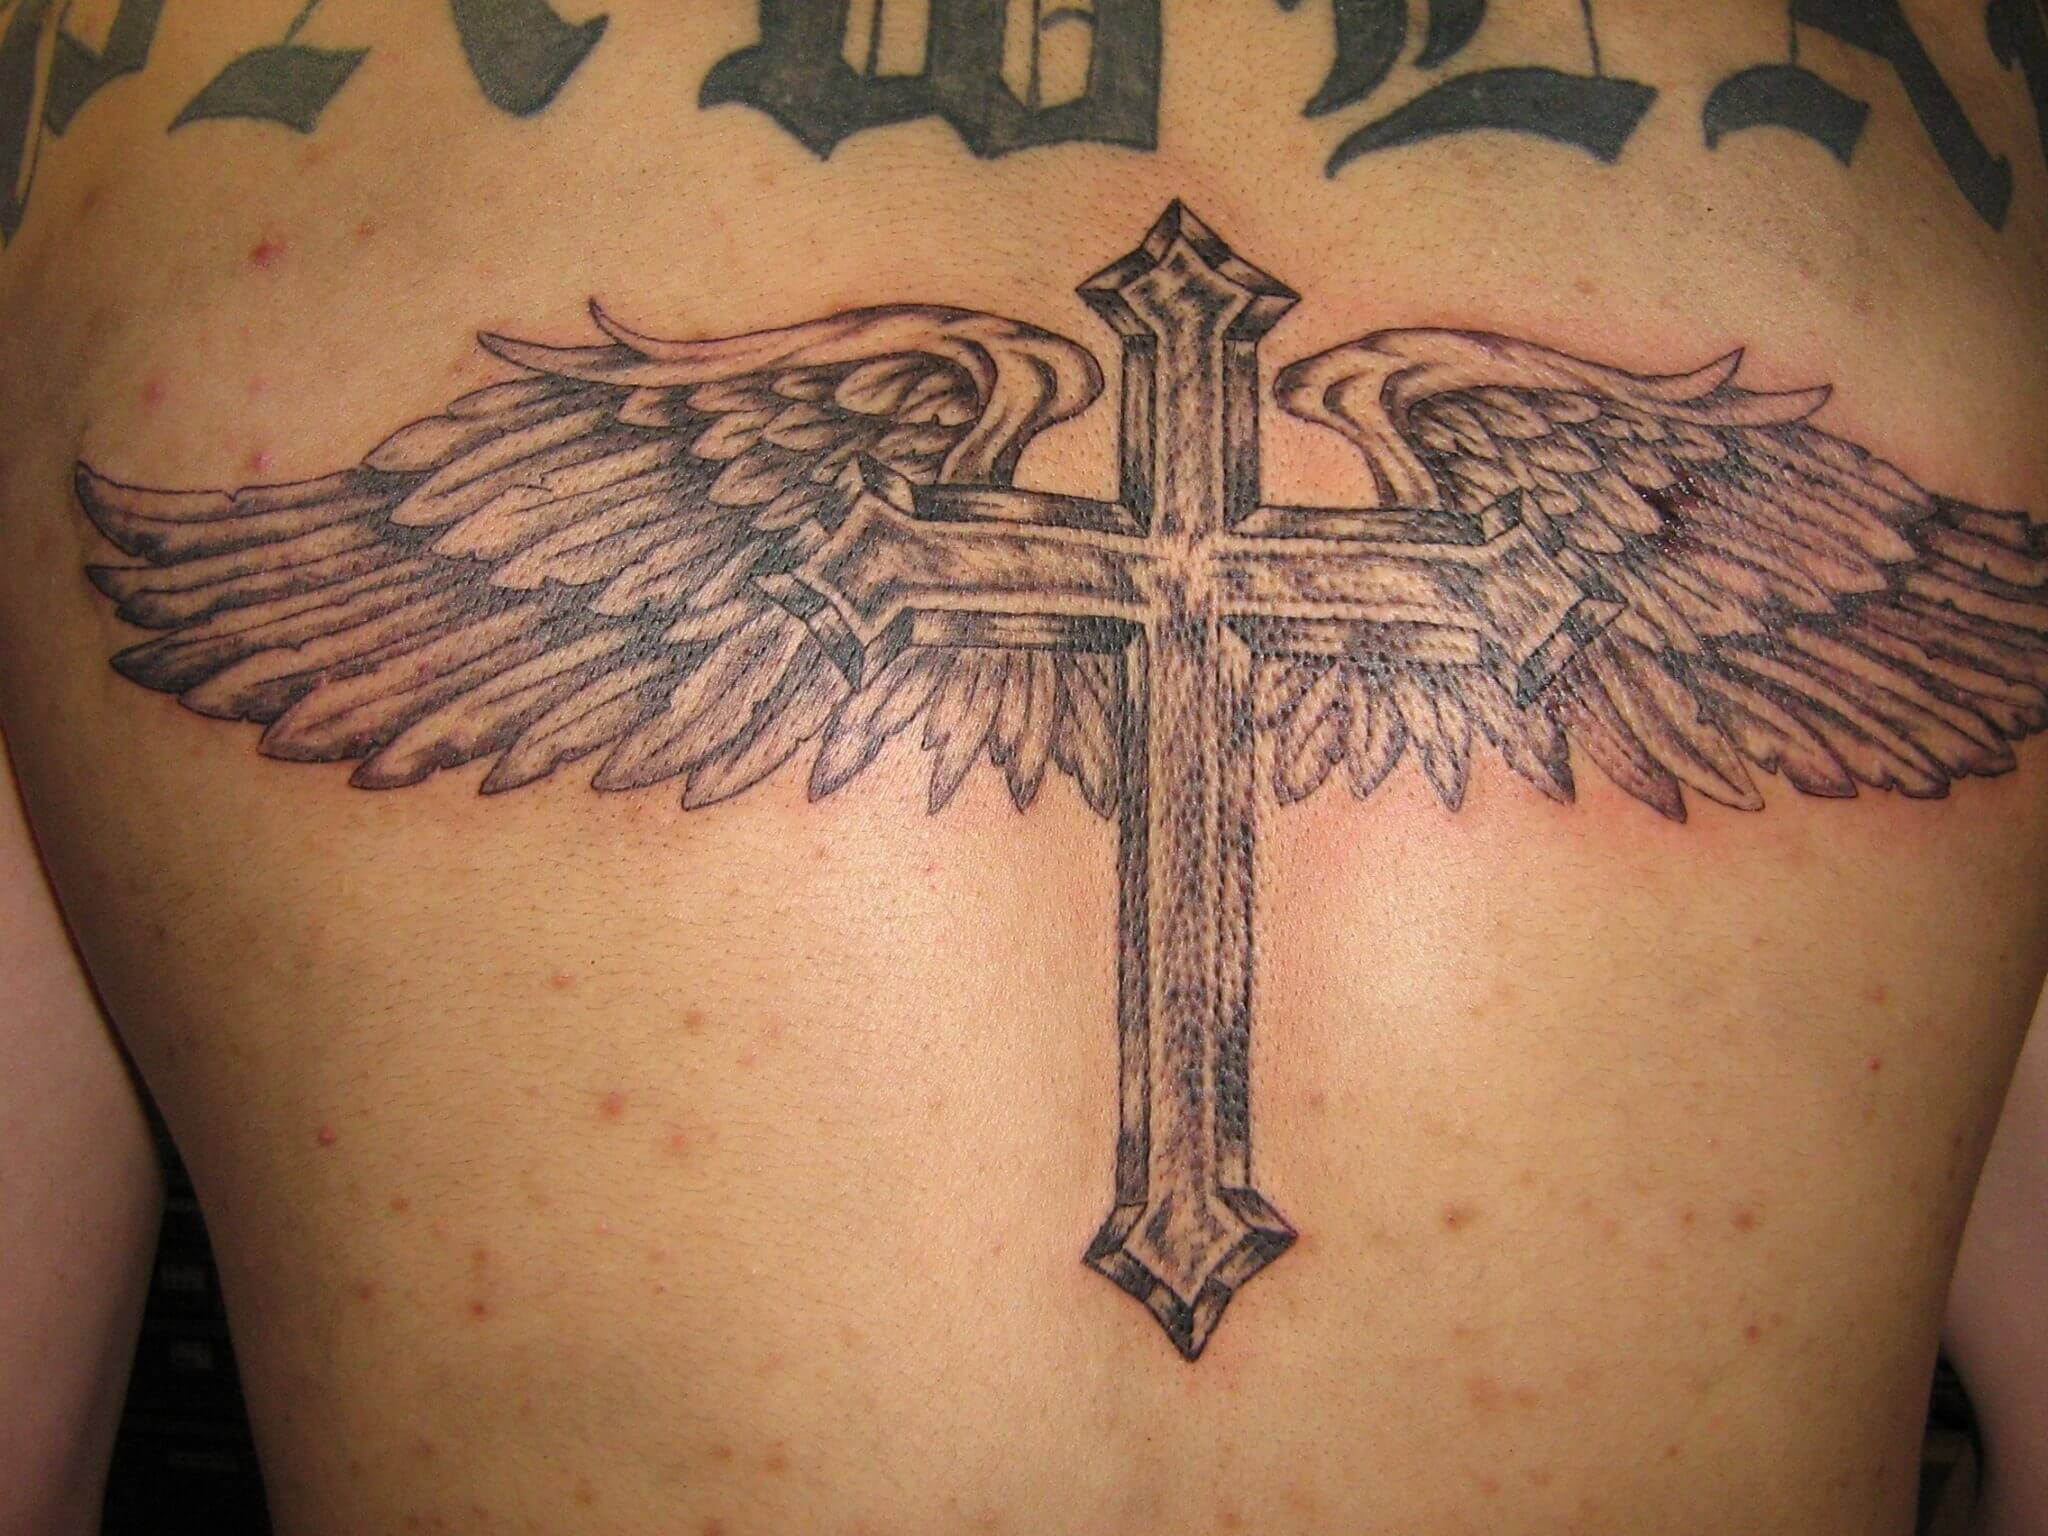 56 Best Cross Tattoos For Men Improb in sizing 2048 X 1536